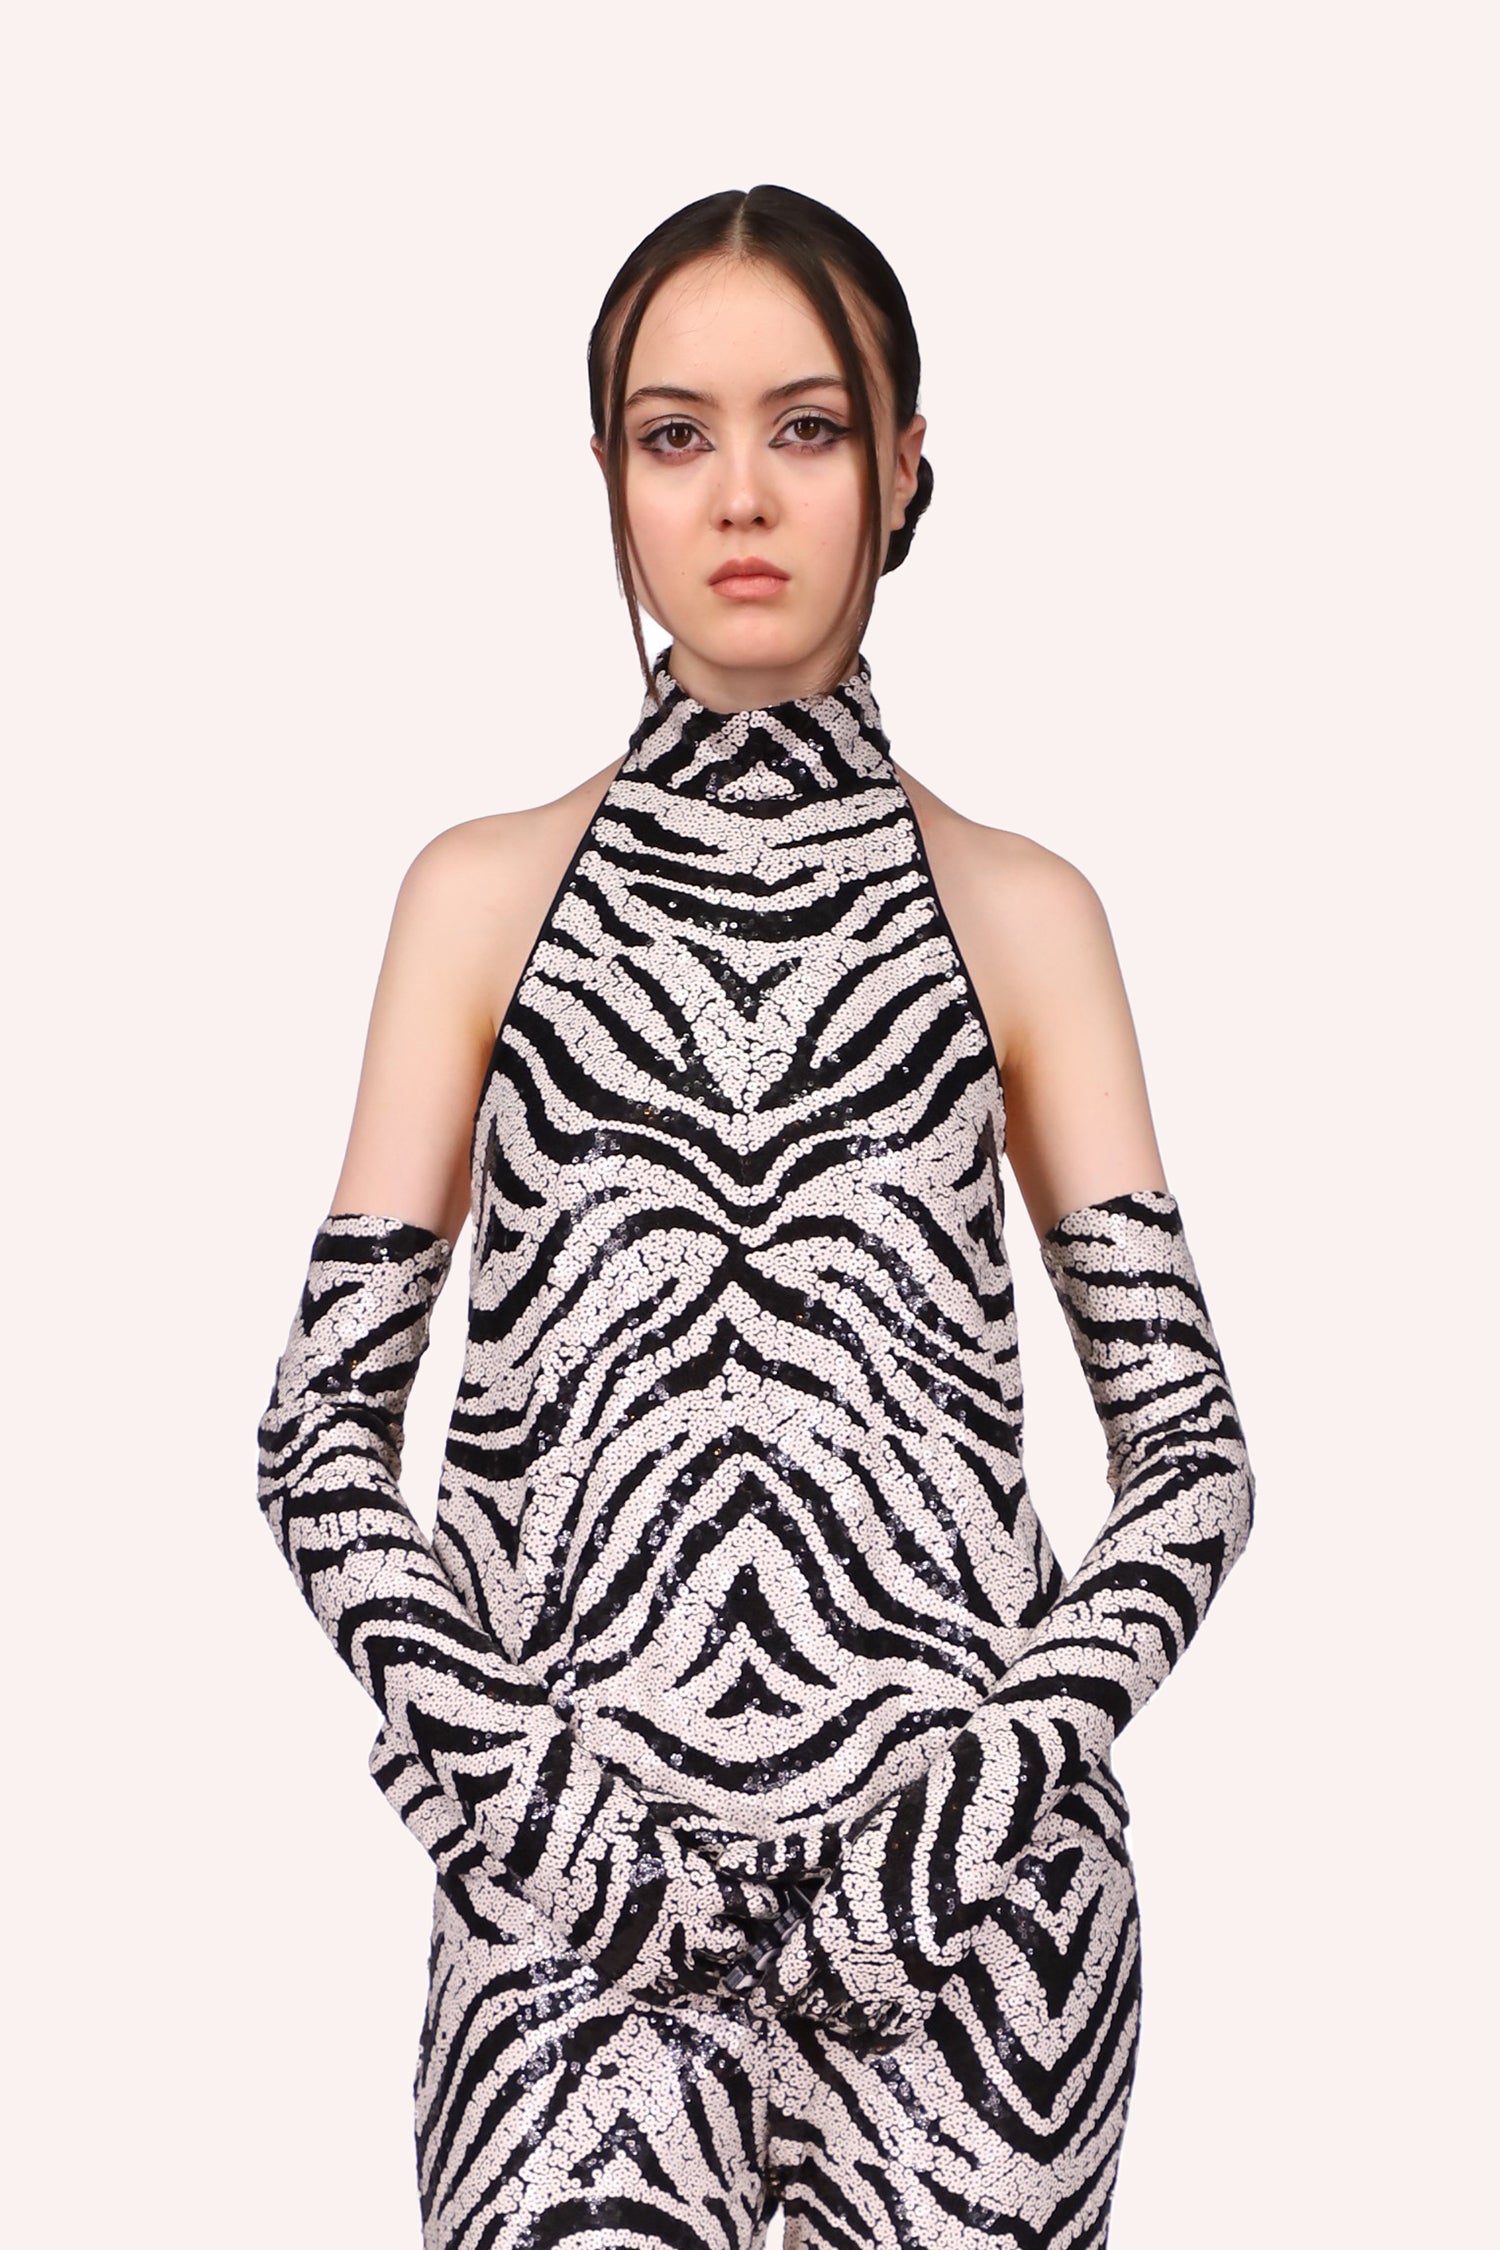 Top sleeveless, front goes up to a turtleneck, the design is in black and white as a zebra pattern